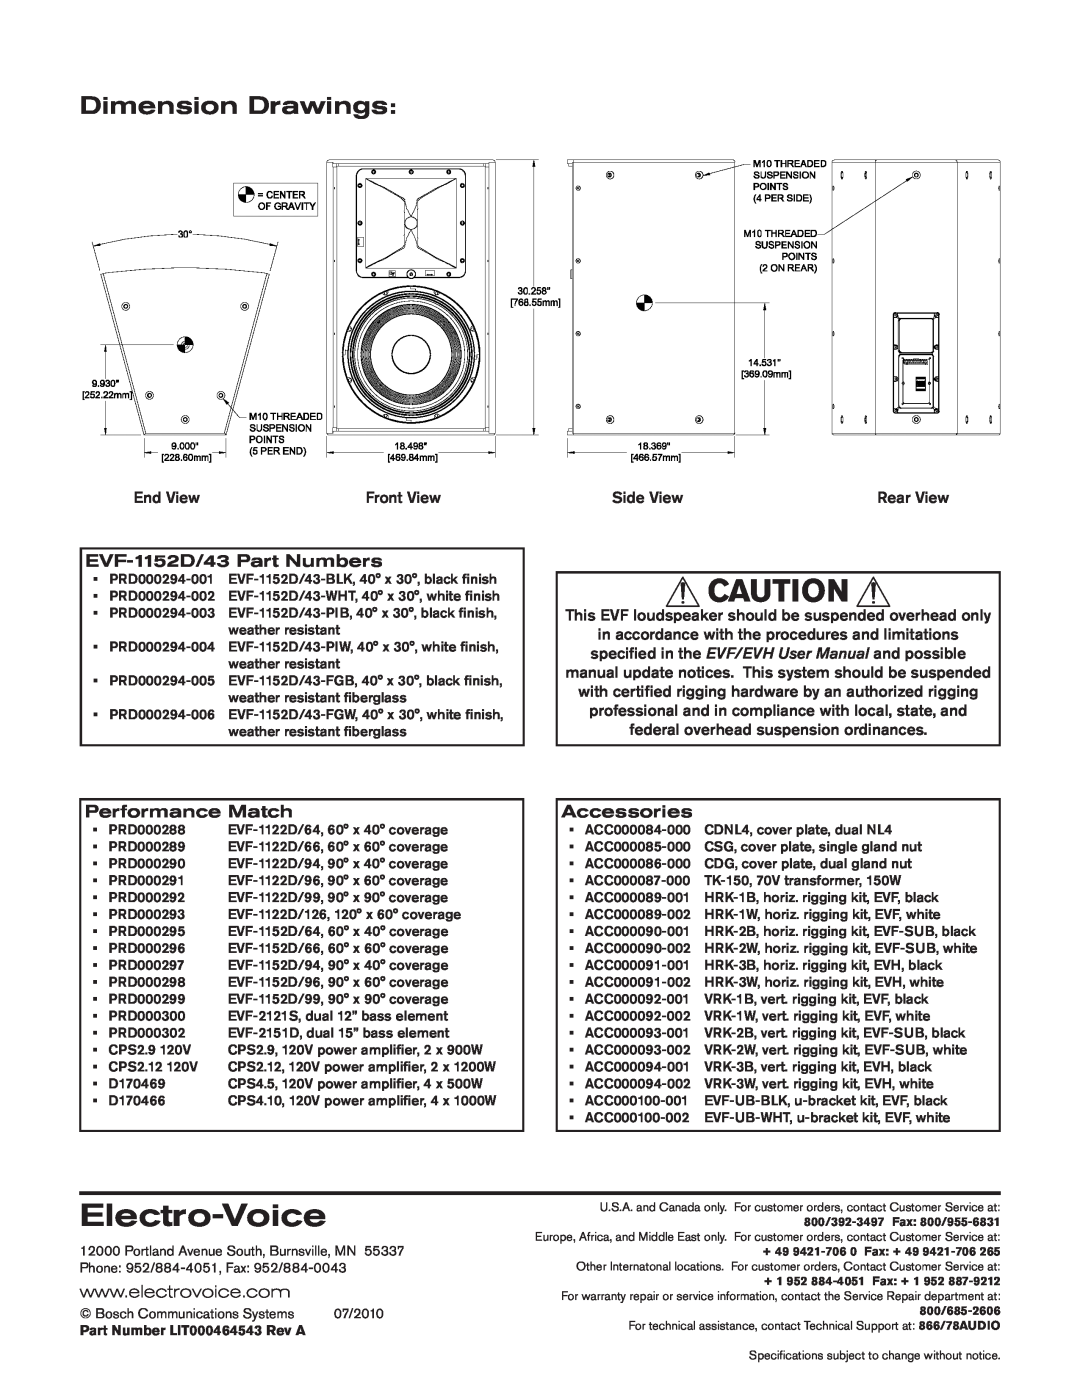 Bosch Appliances EVF-1152D/43-FG Dimension Drawings, Electro-Voice, EVF-1152D/43Part Numbers, Performance Match, End View 